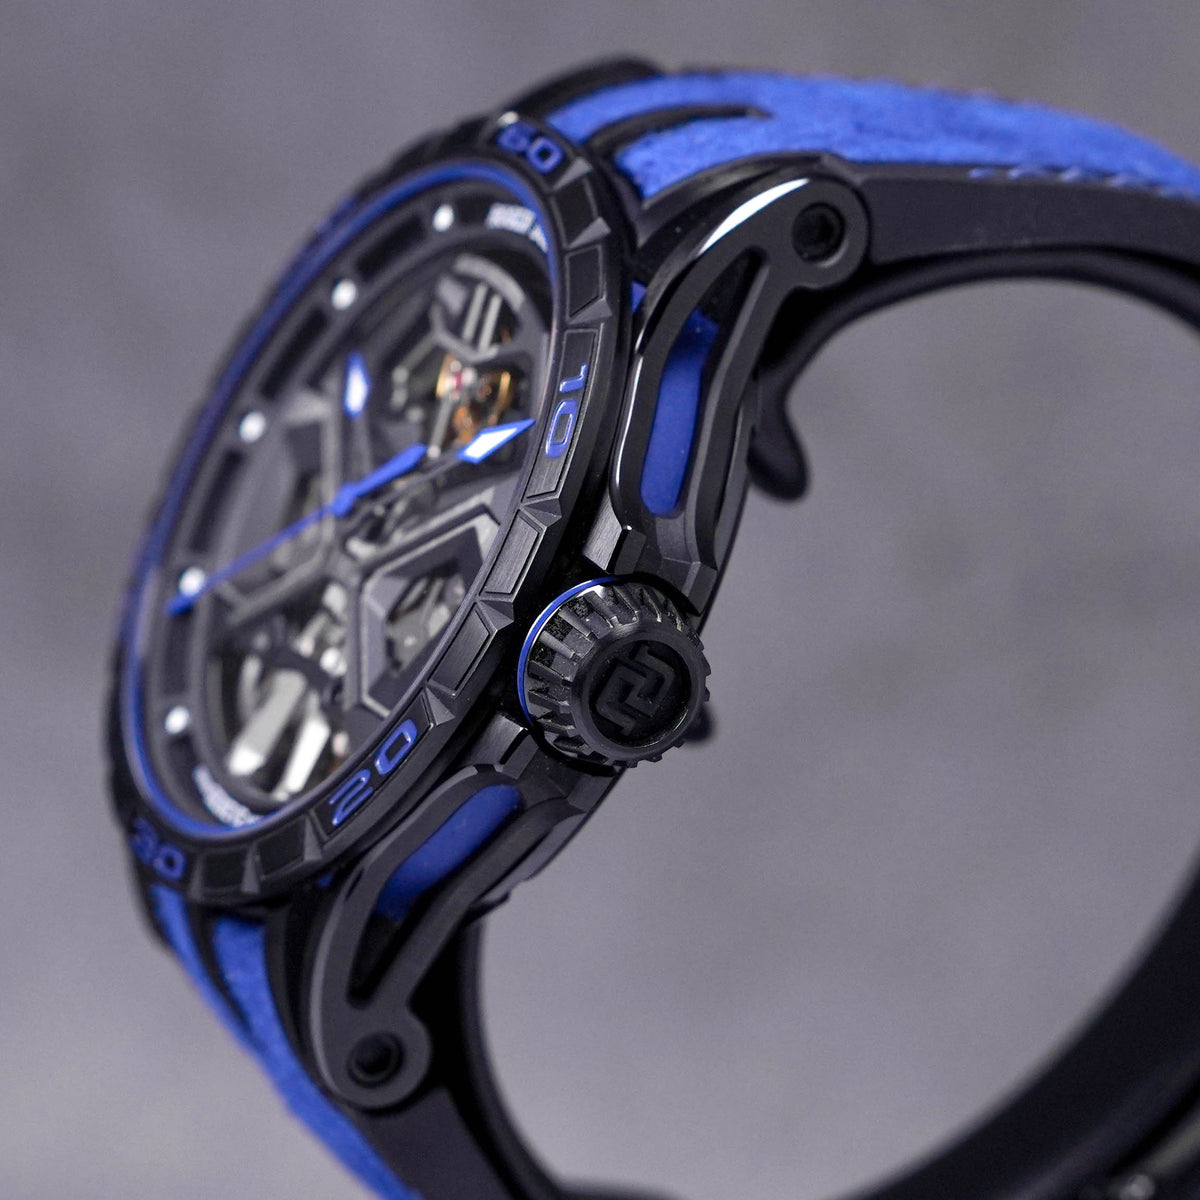 ROGER DUBUIS EXCALIBUR SPIDER HURACAN